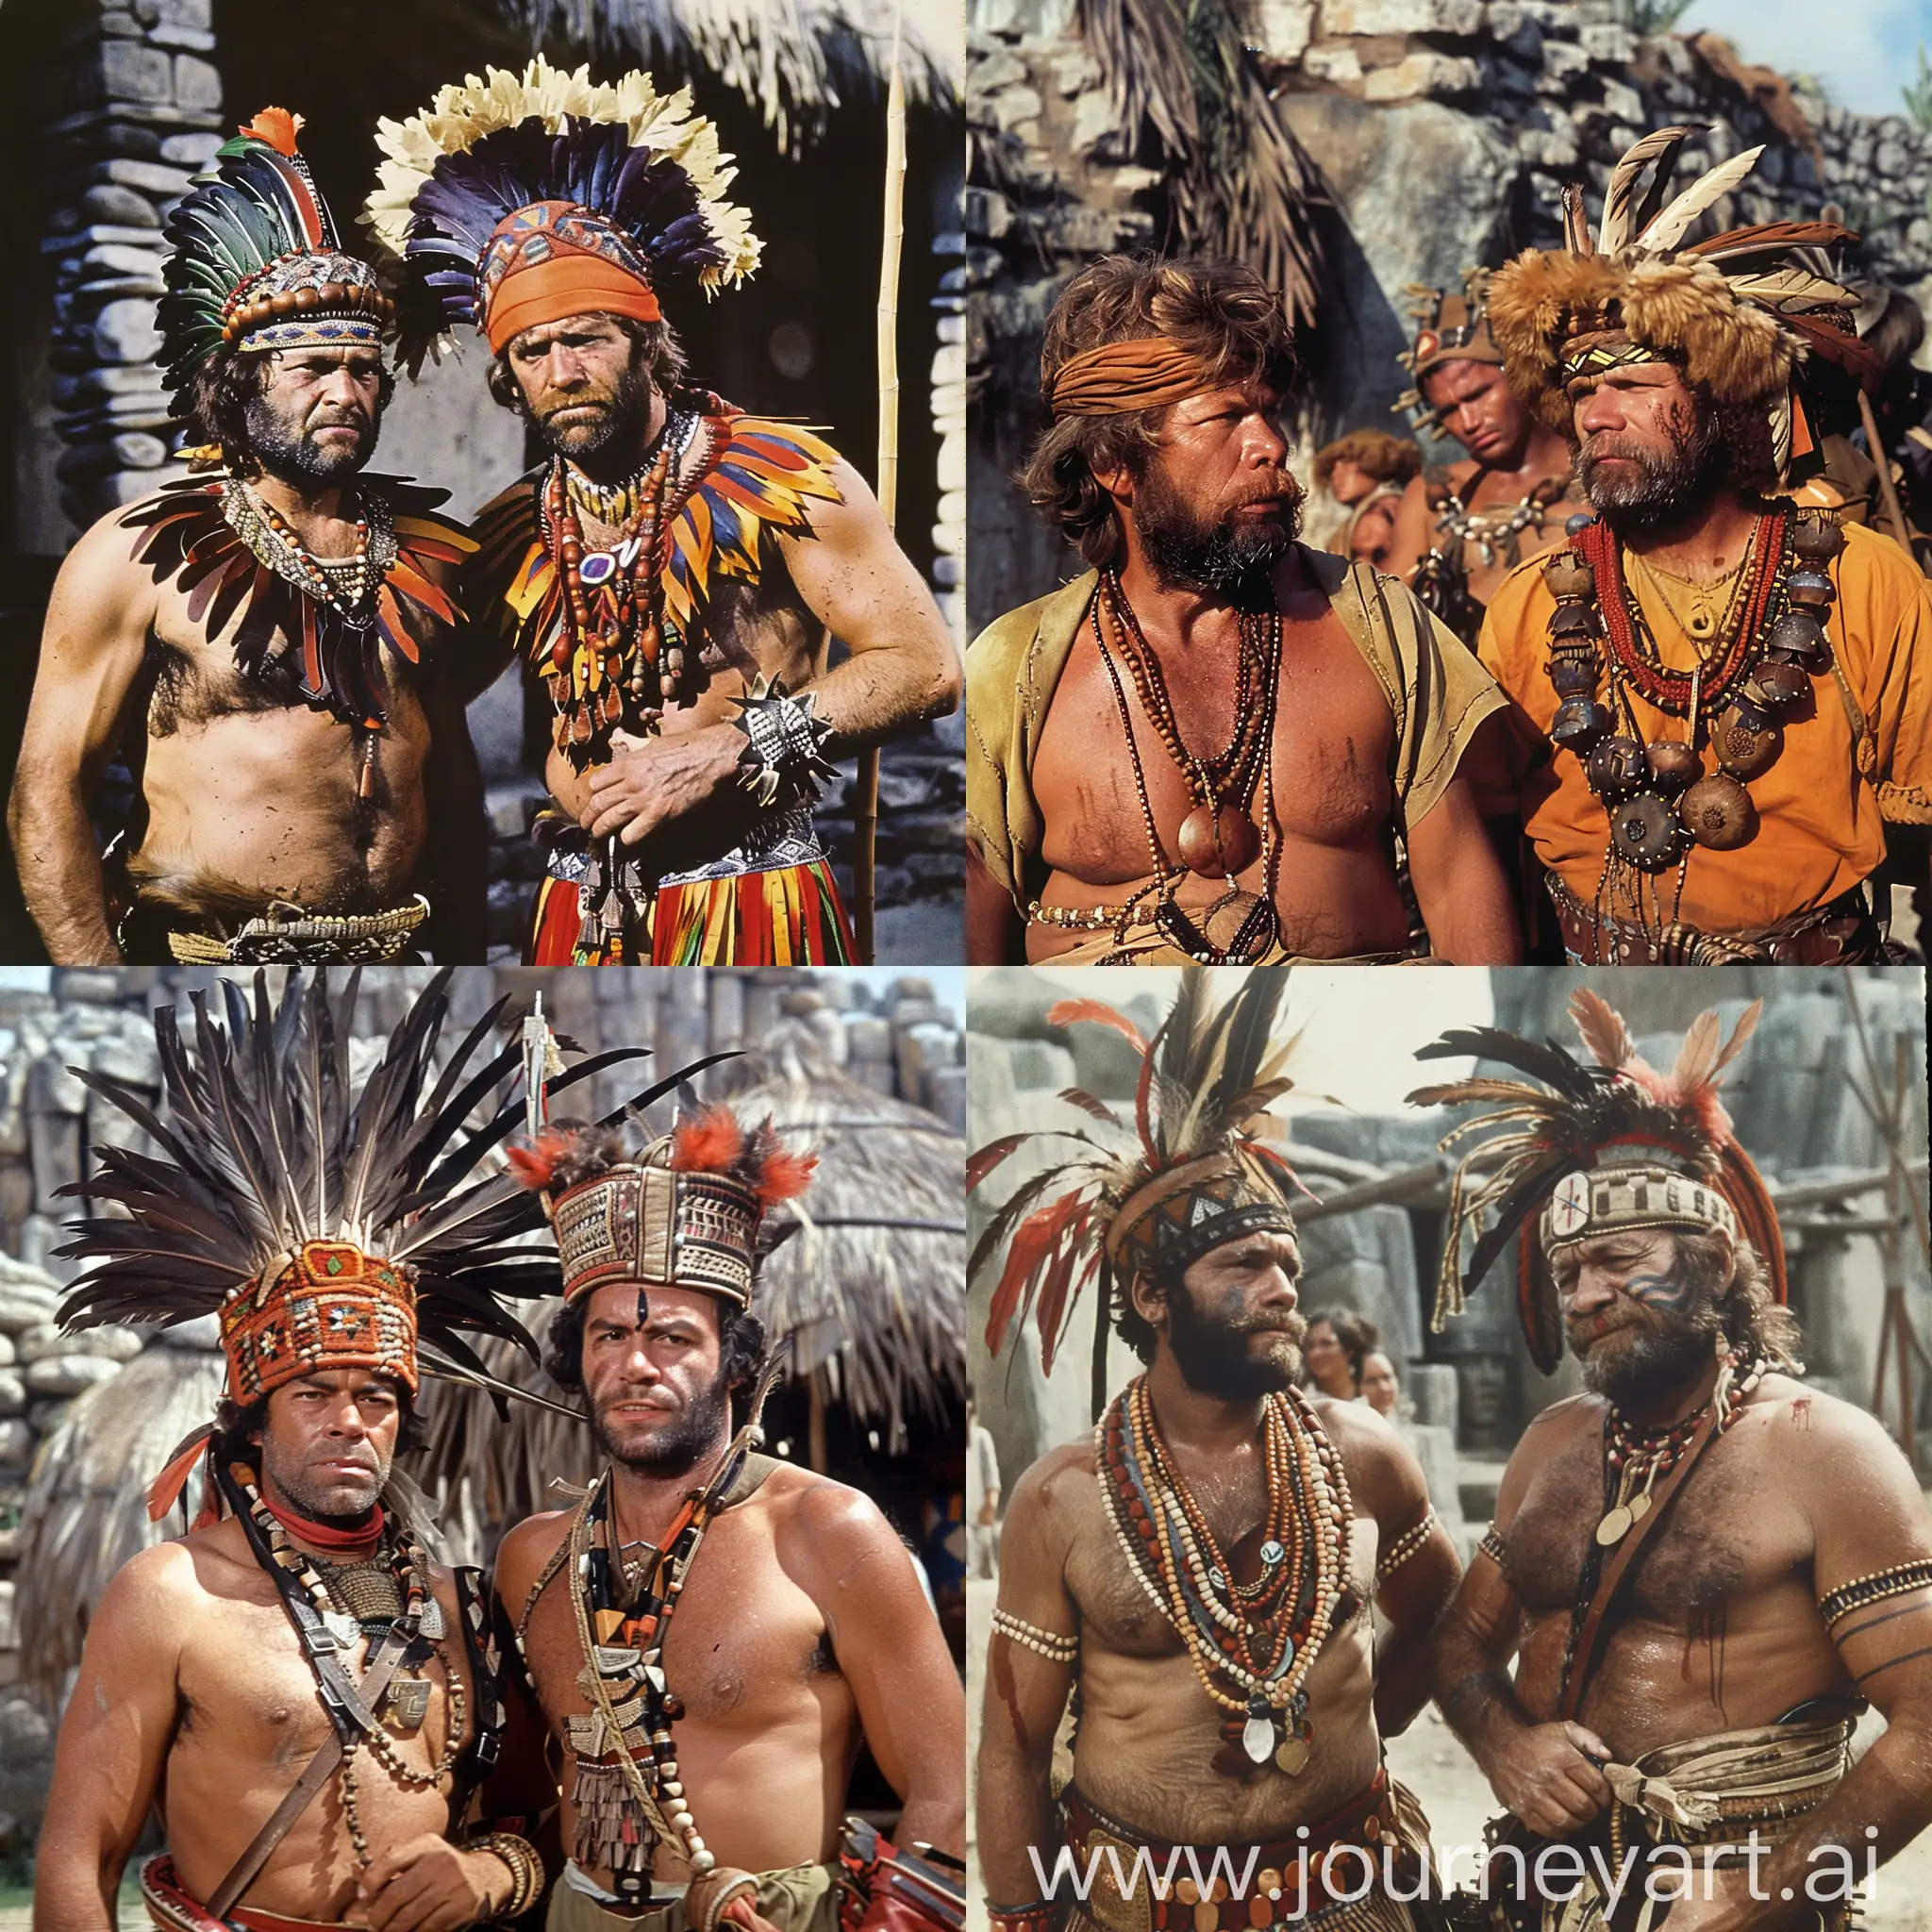 bud Spencer and Terence Hill as Aztec peasants